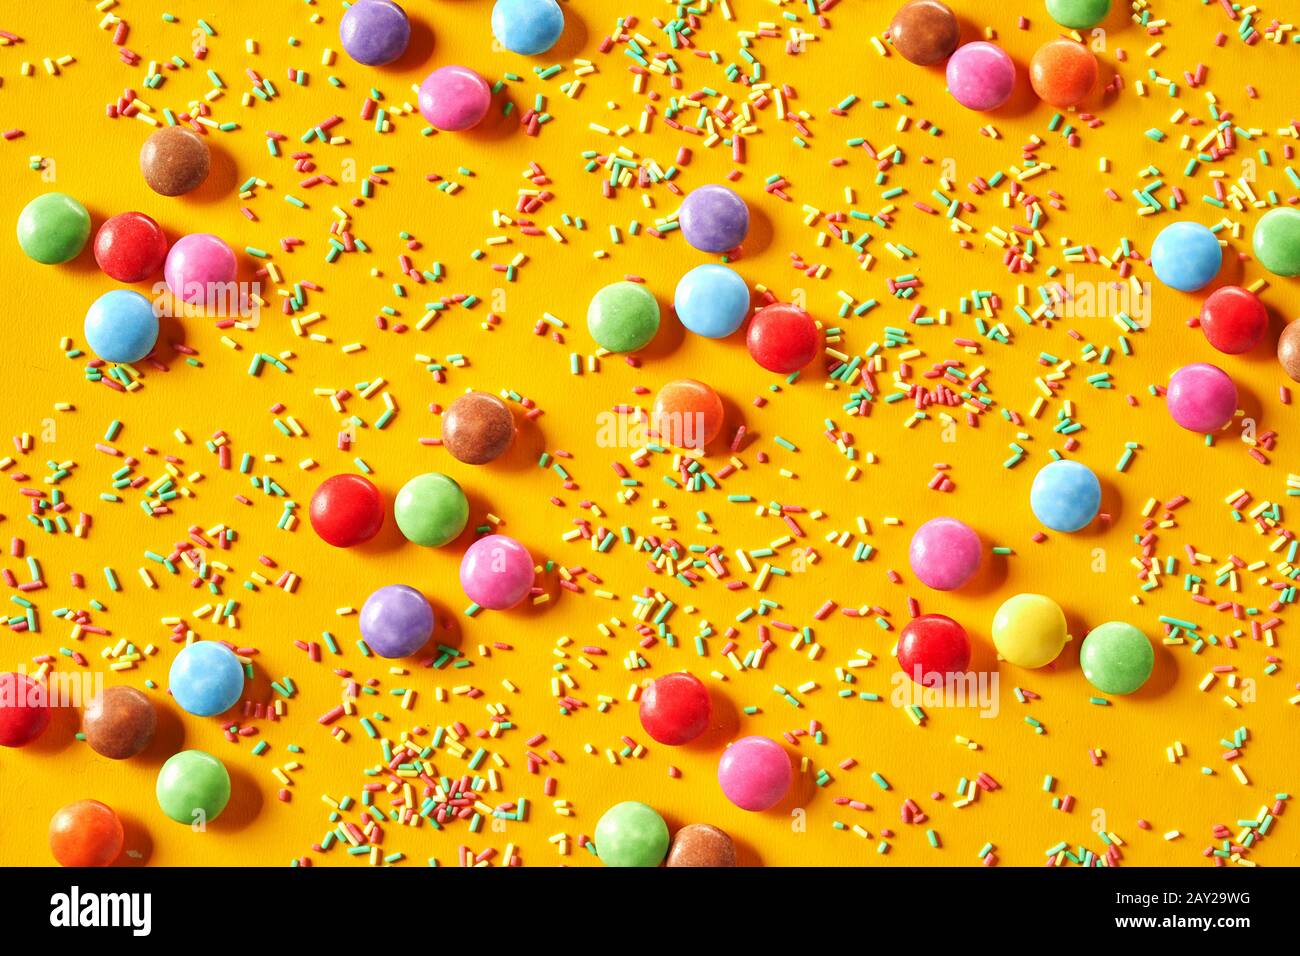 Colorful exotic party background of rainbow sugar-coated chocolate candy and sprinkles on a yellow full frame background Stock Photo